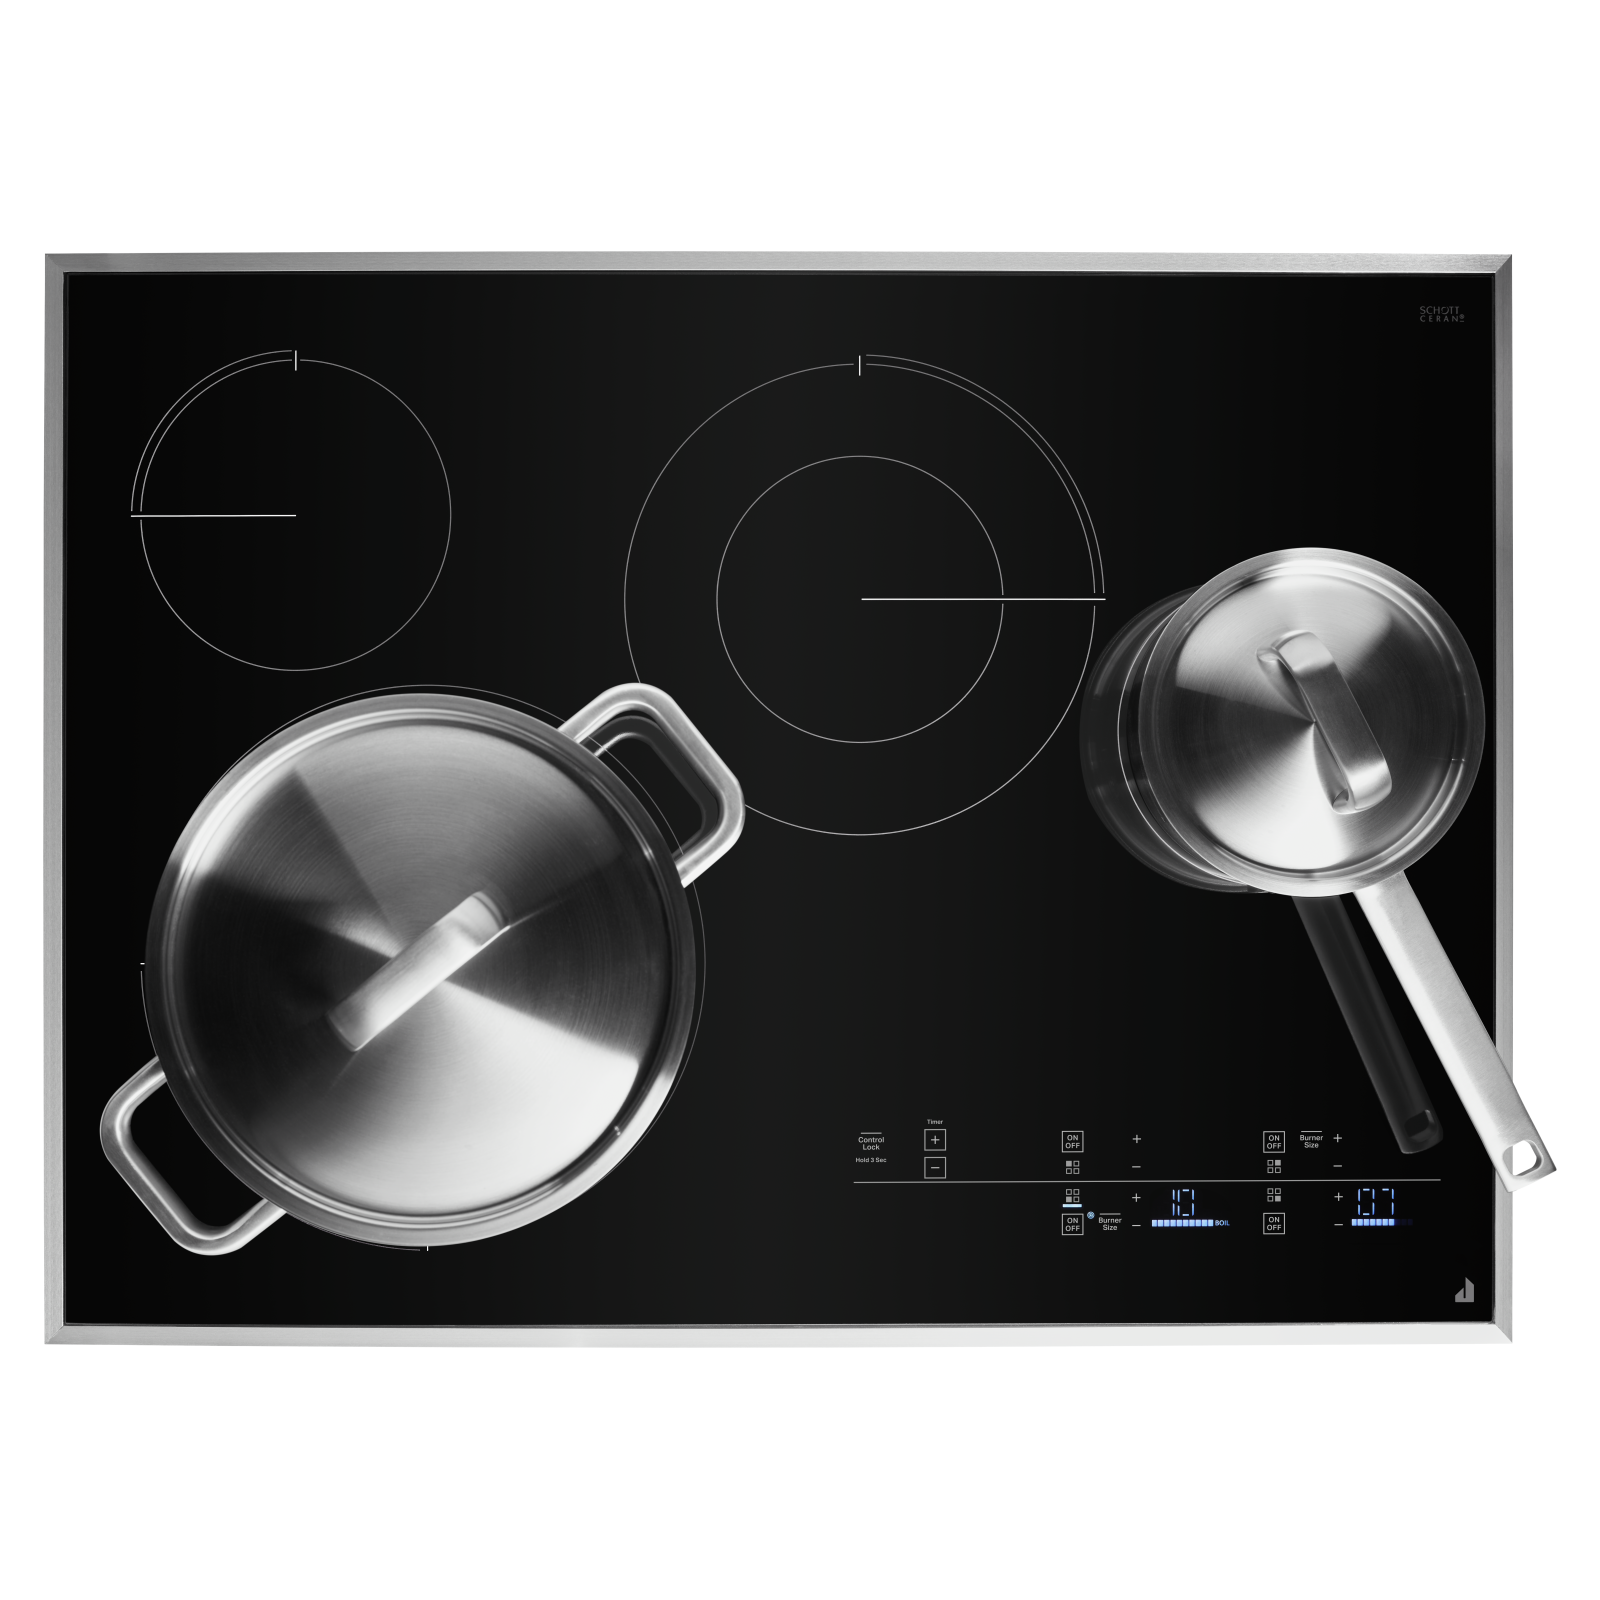 JennAir - 30.8125 inch wide Electric Cooktop in Stainless - JEC4430KS